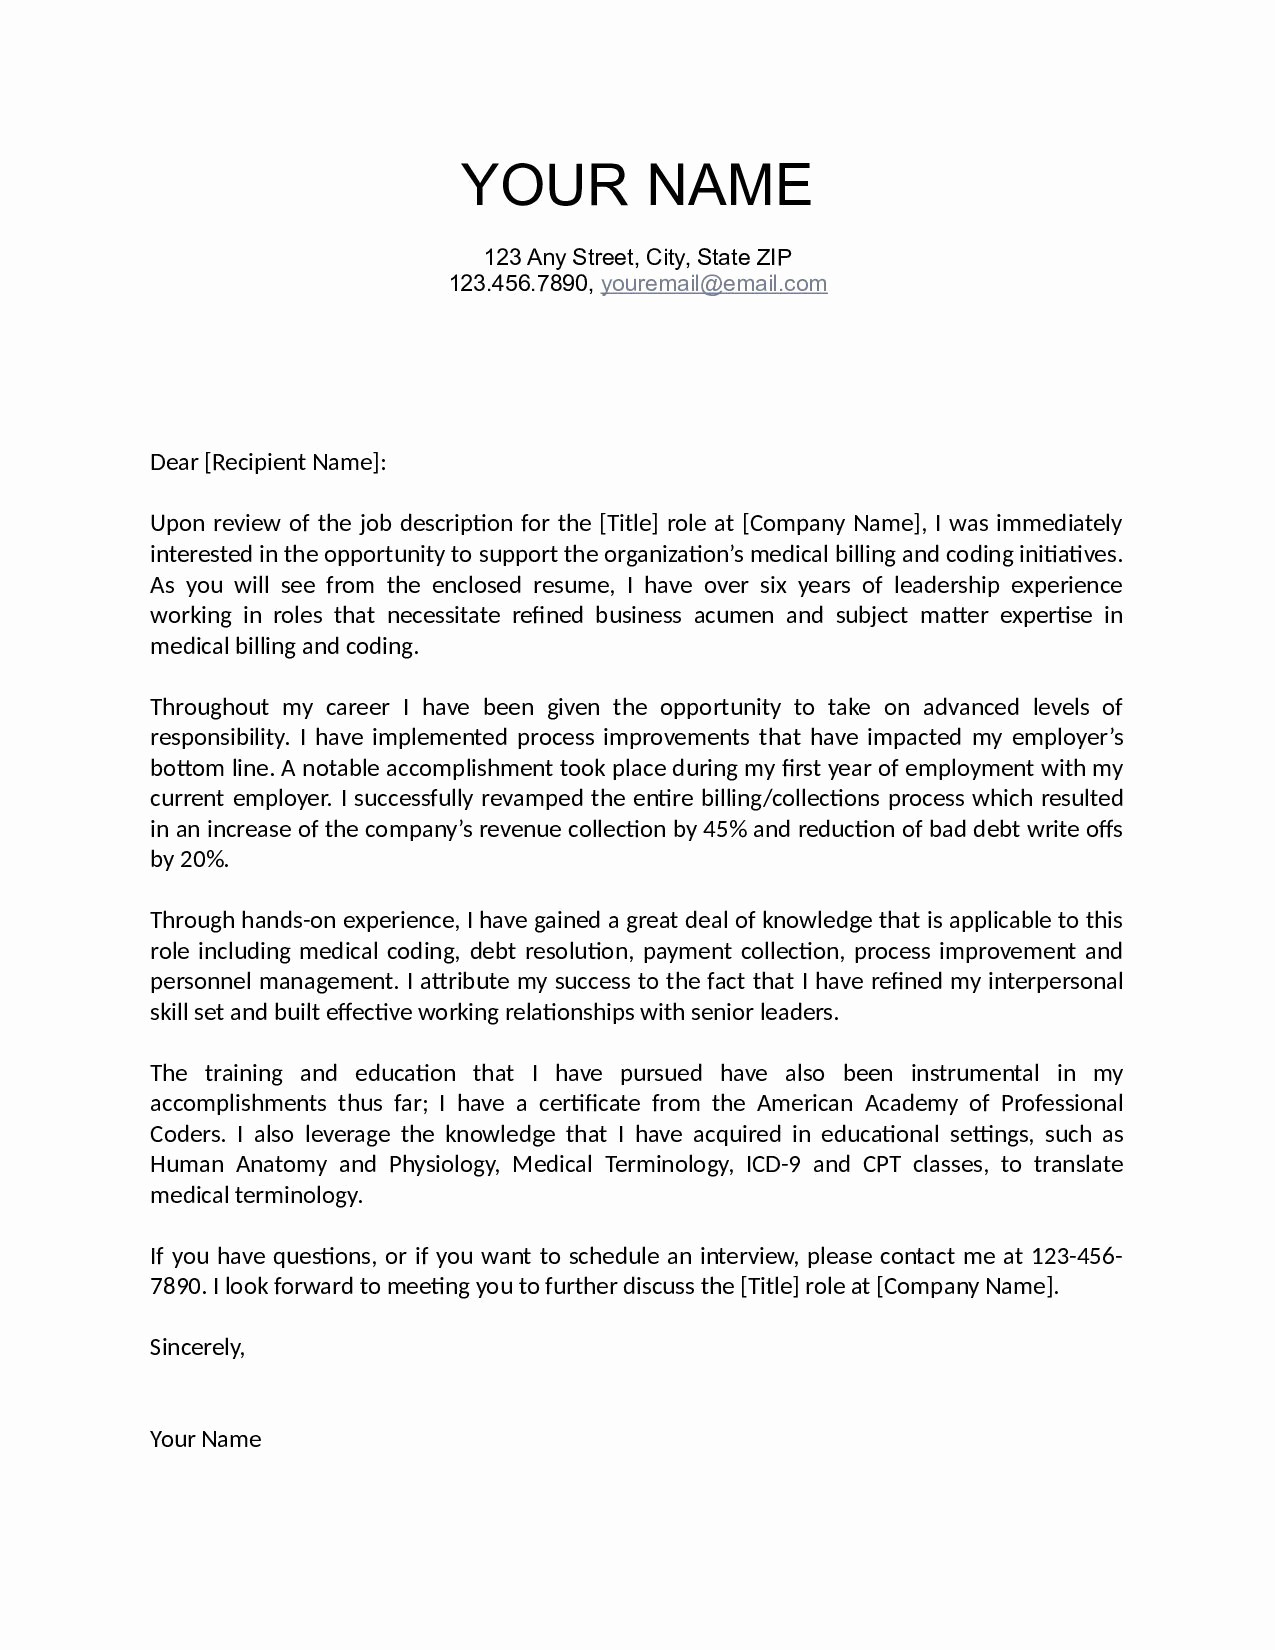 Internship Cover Letter Template - Writing A Good Cover Letter for An Internship